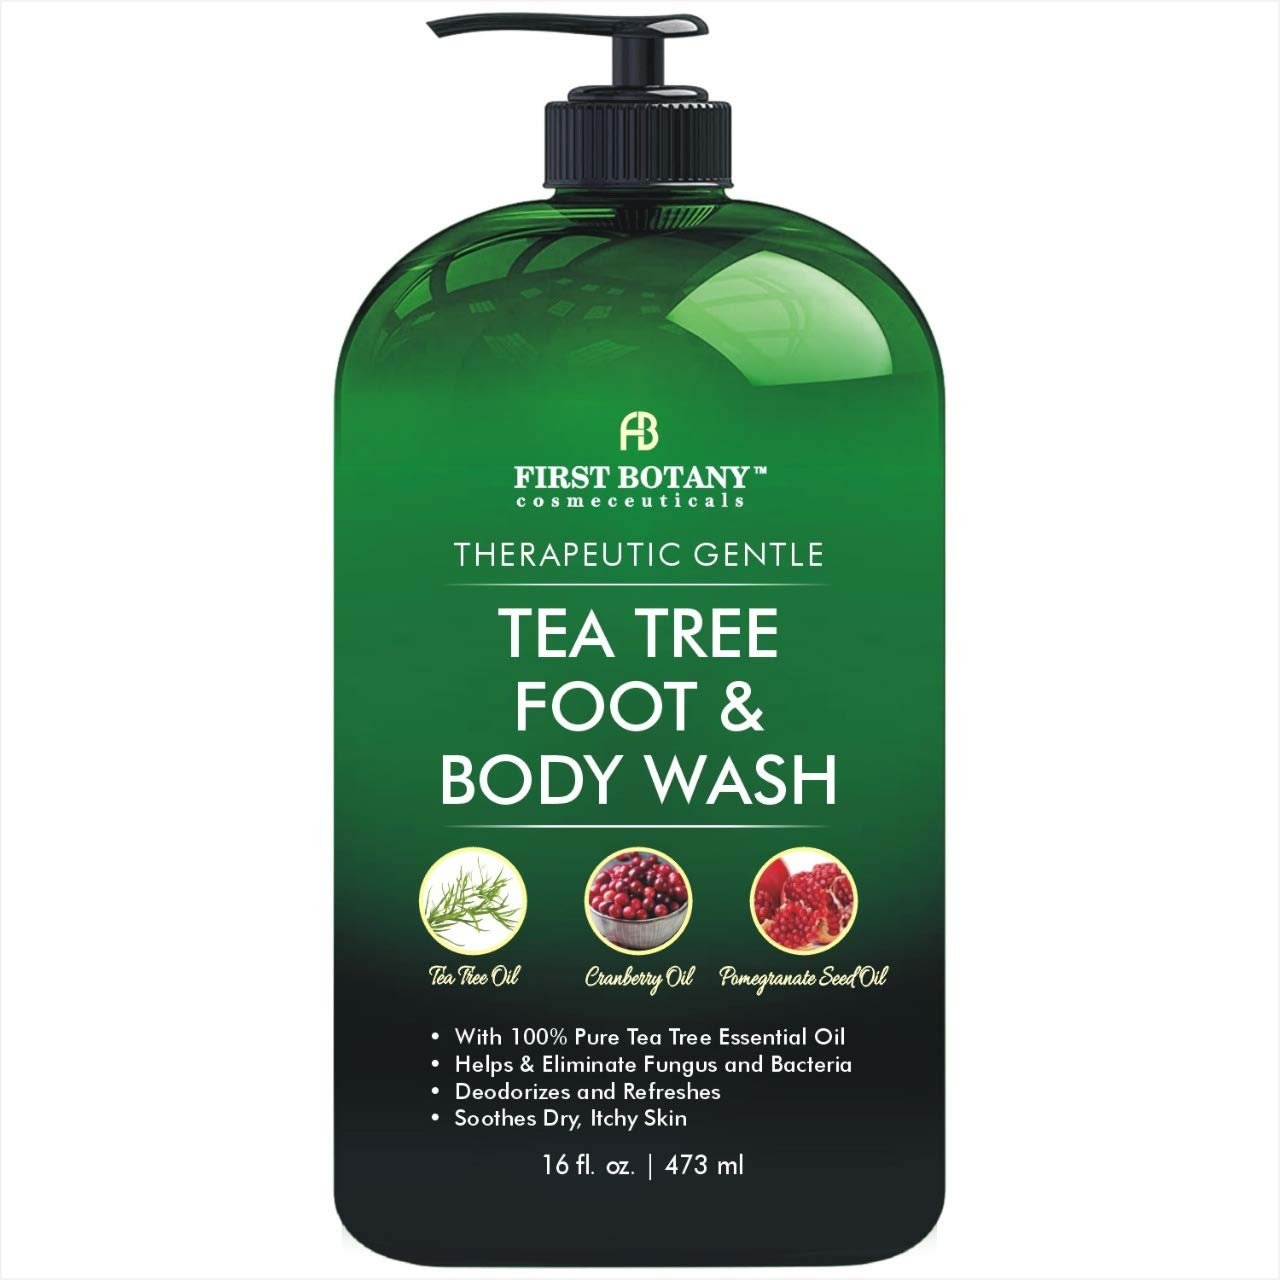 100% Natural Tea Tree Body Wash & Foot Wash - Fights with Corns, Calluses, Dandruff & Warts, Nail Issues, Athletes Foot, Ringworms, Acne treatment, Eczema & Body Odor, Jock Itch - 16 fl oz with dispenser pump